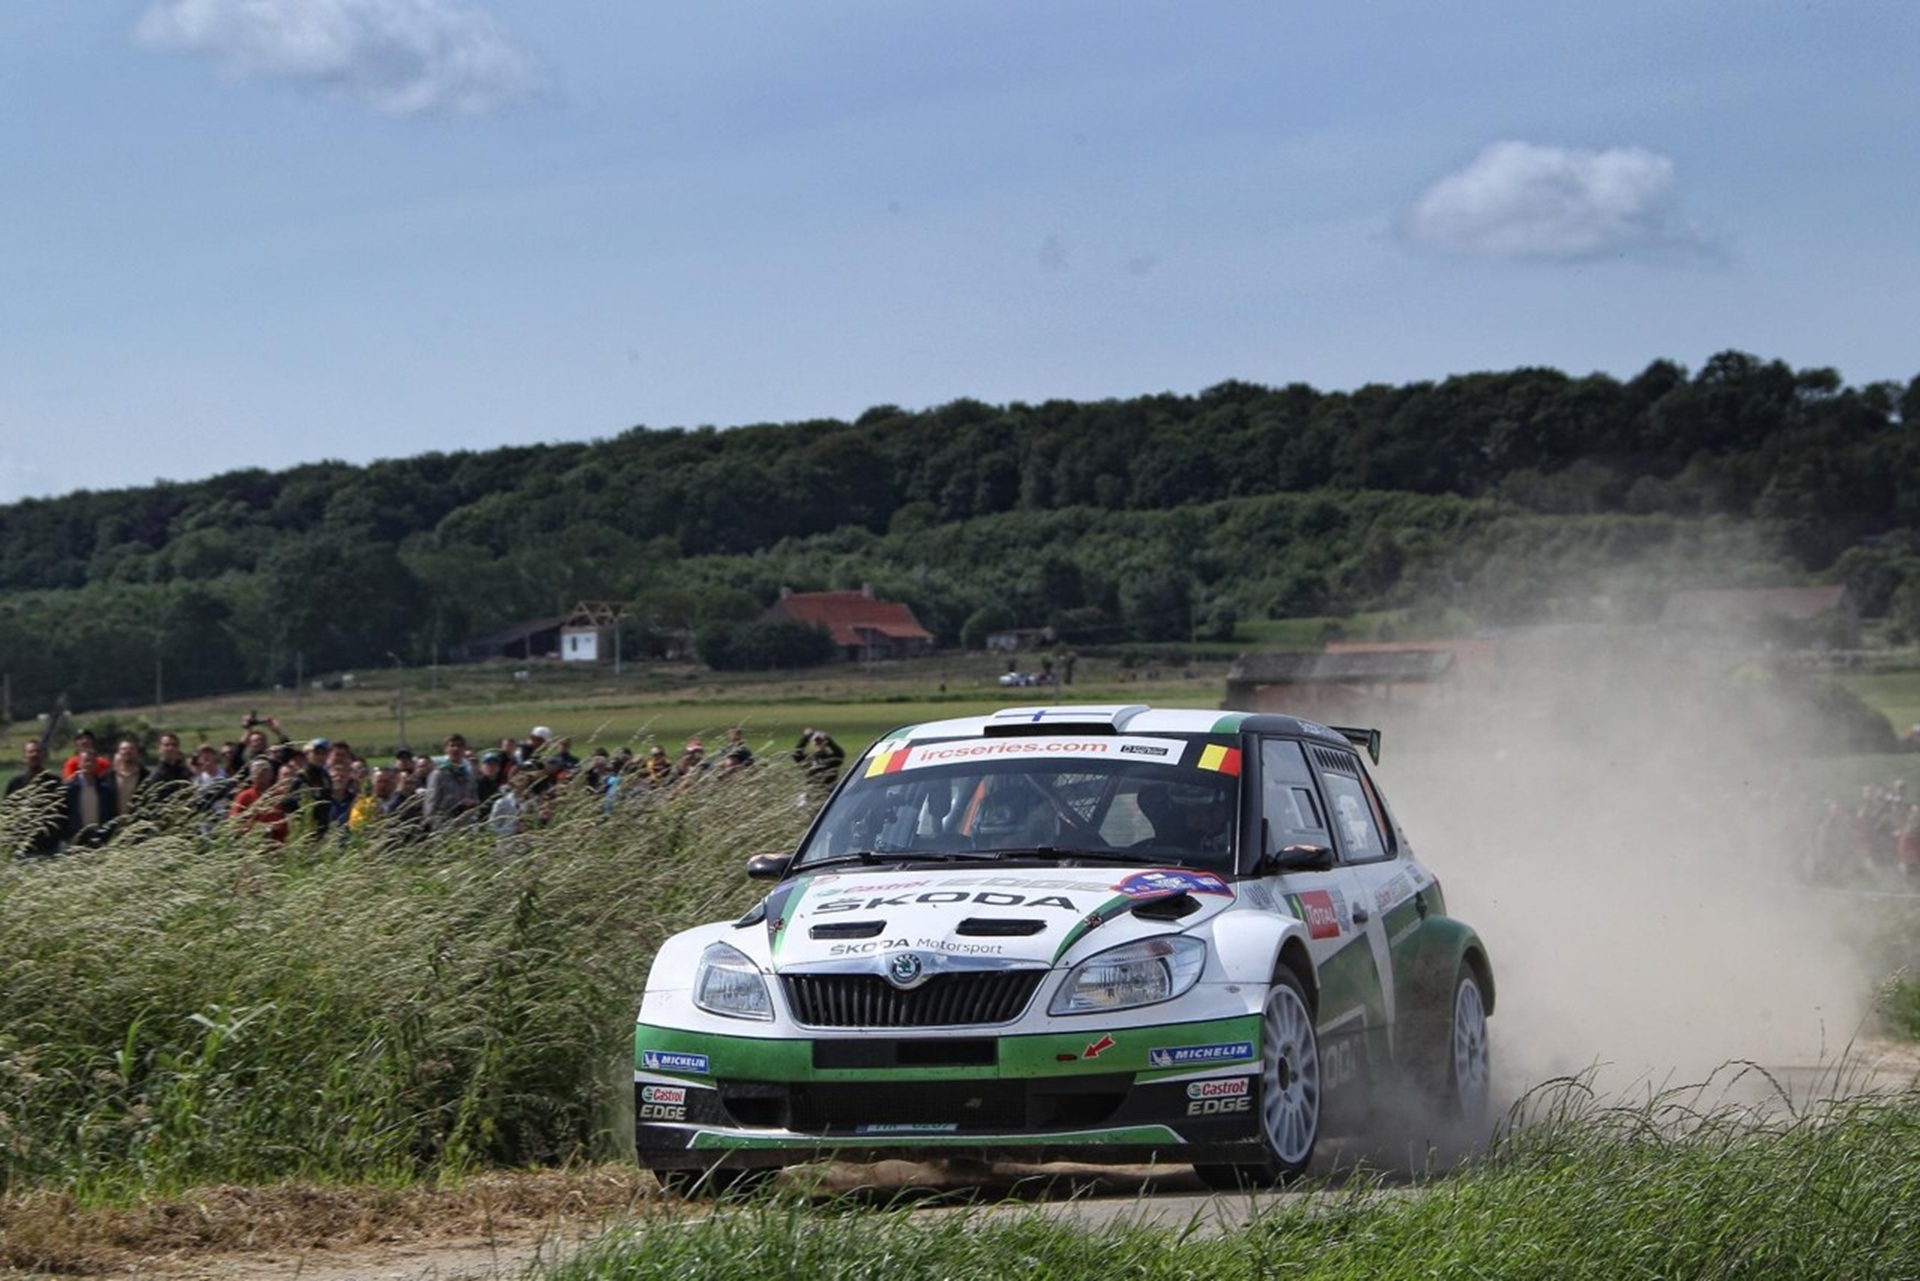 HANNINEN’S GOAL AT THE BOSPHORUS RALLY IS TO REMAIN AT THE TOP OF THE EUROPEAN CHAMPIONSHIP STANDINGS